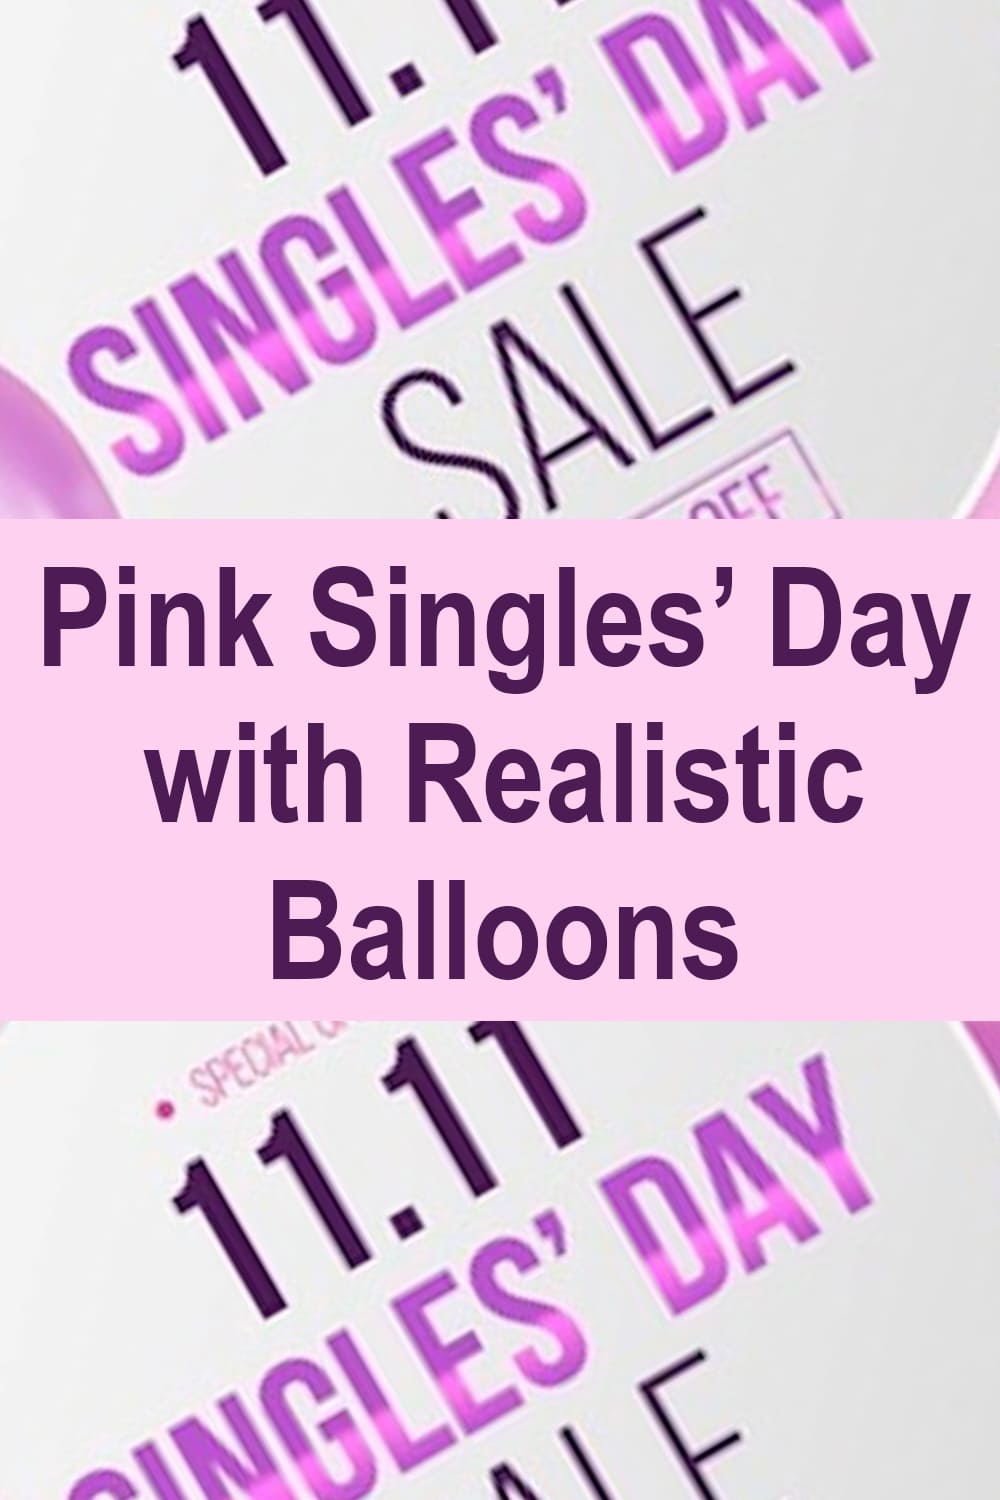 Pink Singles' Day with Realistic Balloons Free Vector